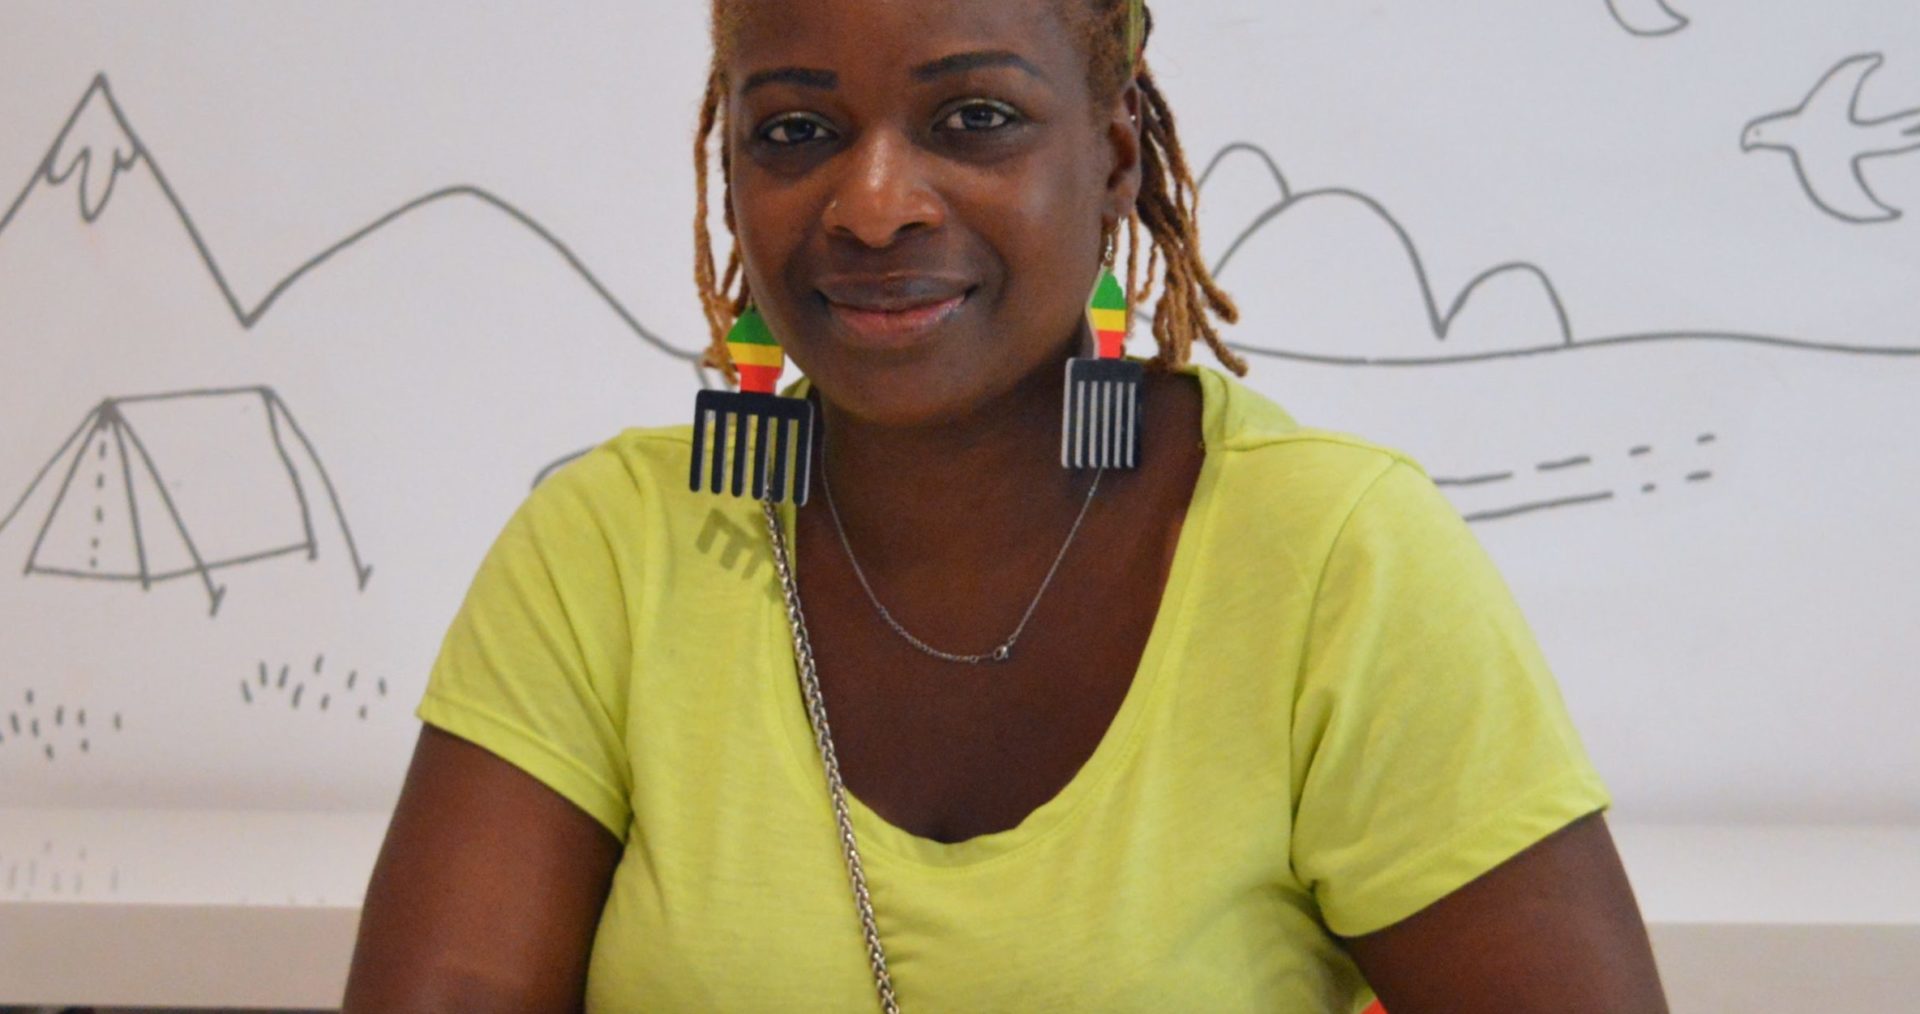 Shenelle has warm toned dreadlocks with a colourful scarf tied on top of her head. She has afro-comb earrings painted the colours of the Pan-African flag and is wearing a bright green top. She sits smiling at the camera with her hands clasped on the table in front of her. Her finger nails are colourful and sparkly.